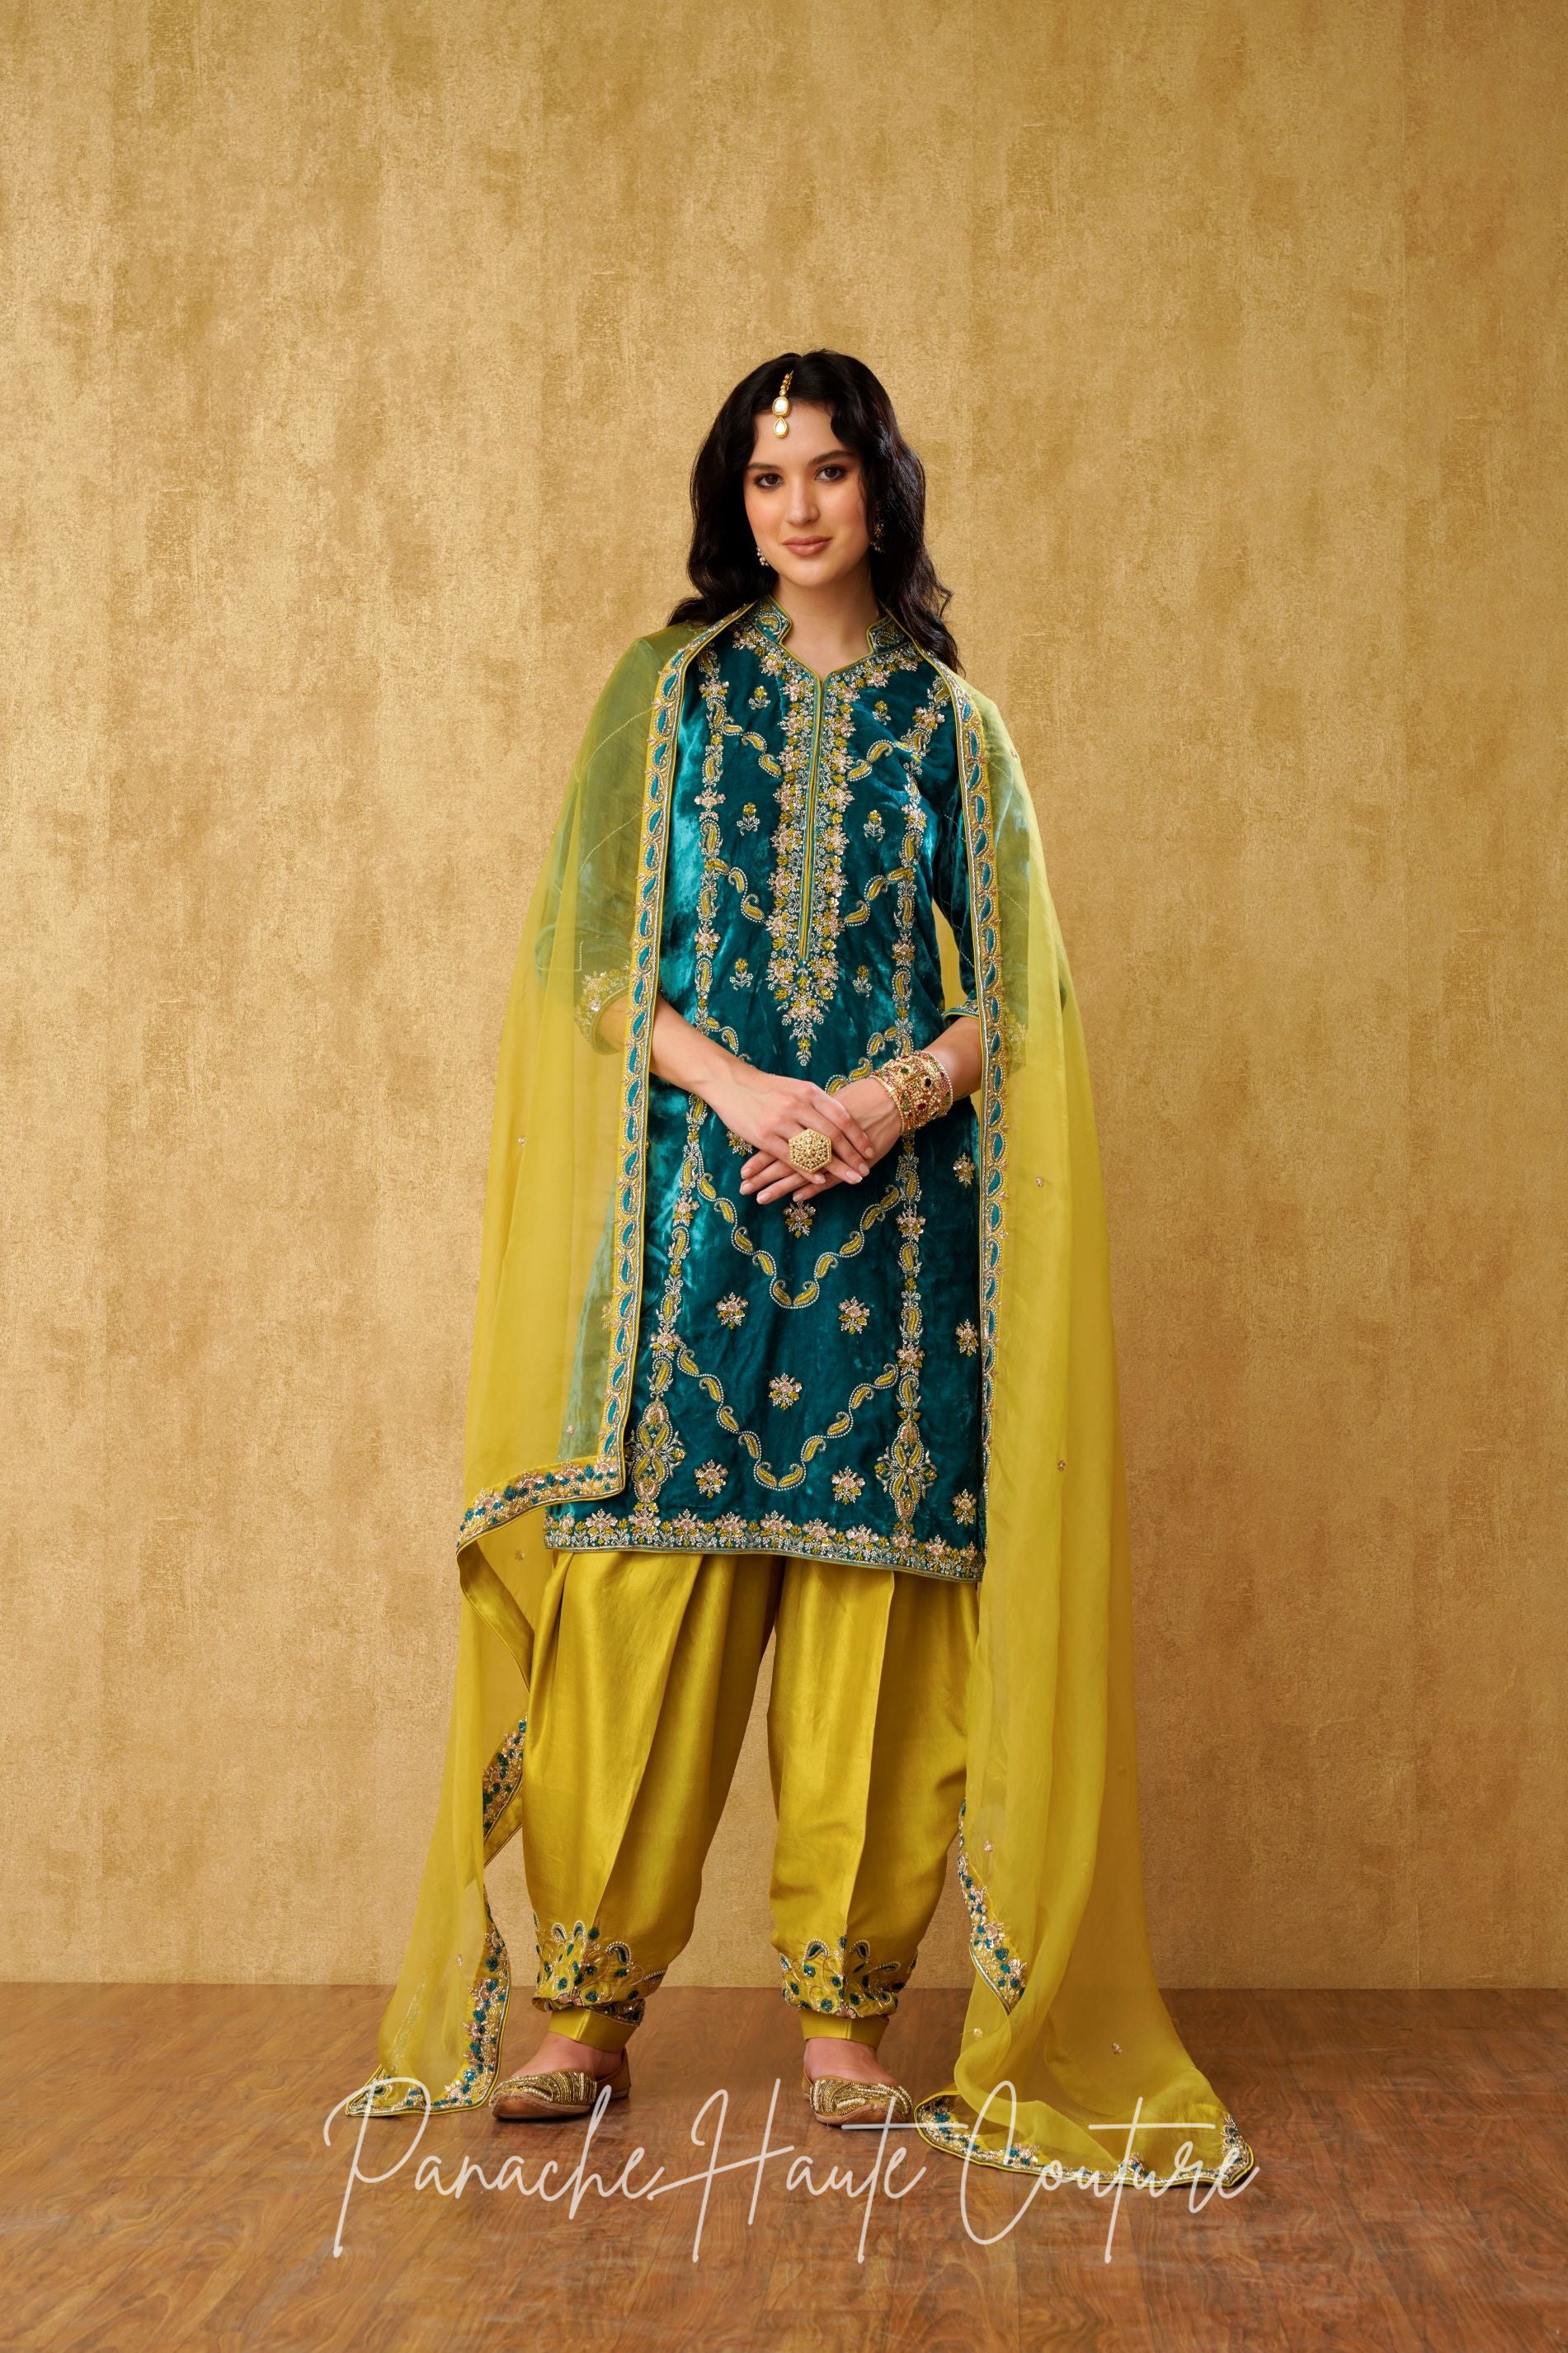 Teal Blue and Chartreuse Yellow Silk Punjabi Suit Elegant Ethnic Wear for Women